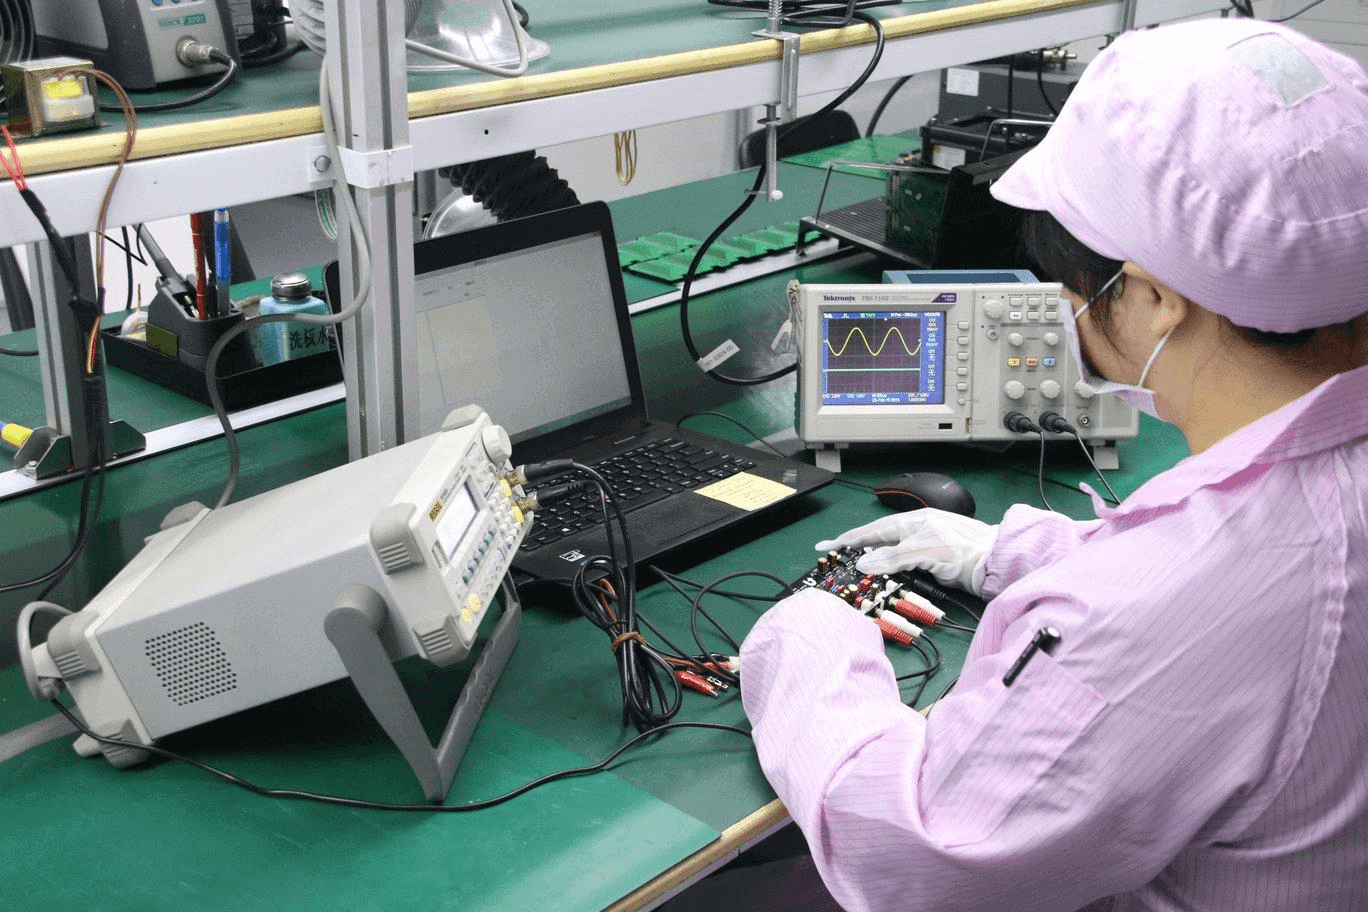 Factory worker in a pink shirt and white cap working with electronic devices. Sitting in front of a laptop connected to a circuit board with wires. Other electronic components and devices on the table. Visible clock and green-tinted surroundings, representing the factory environment.